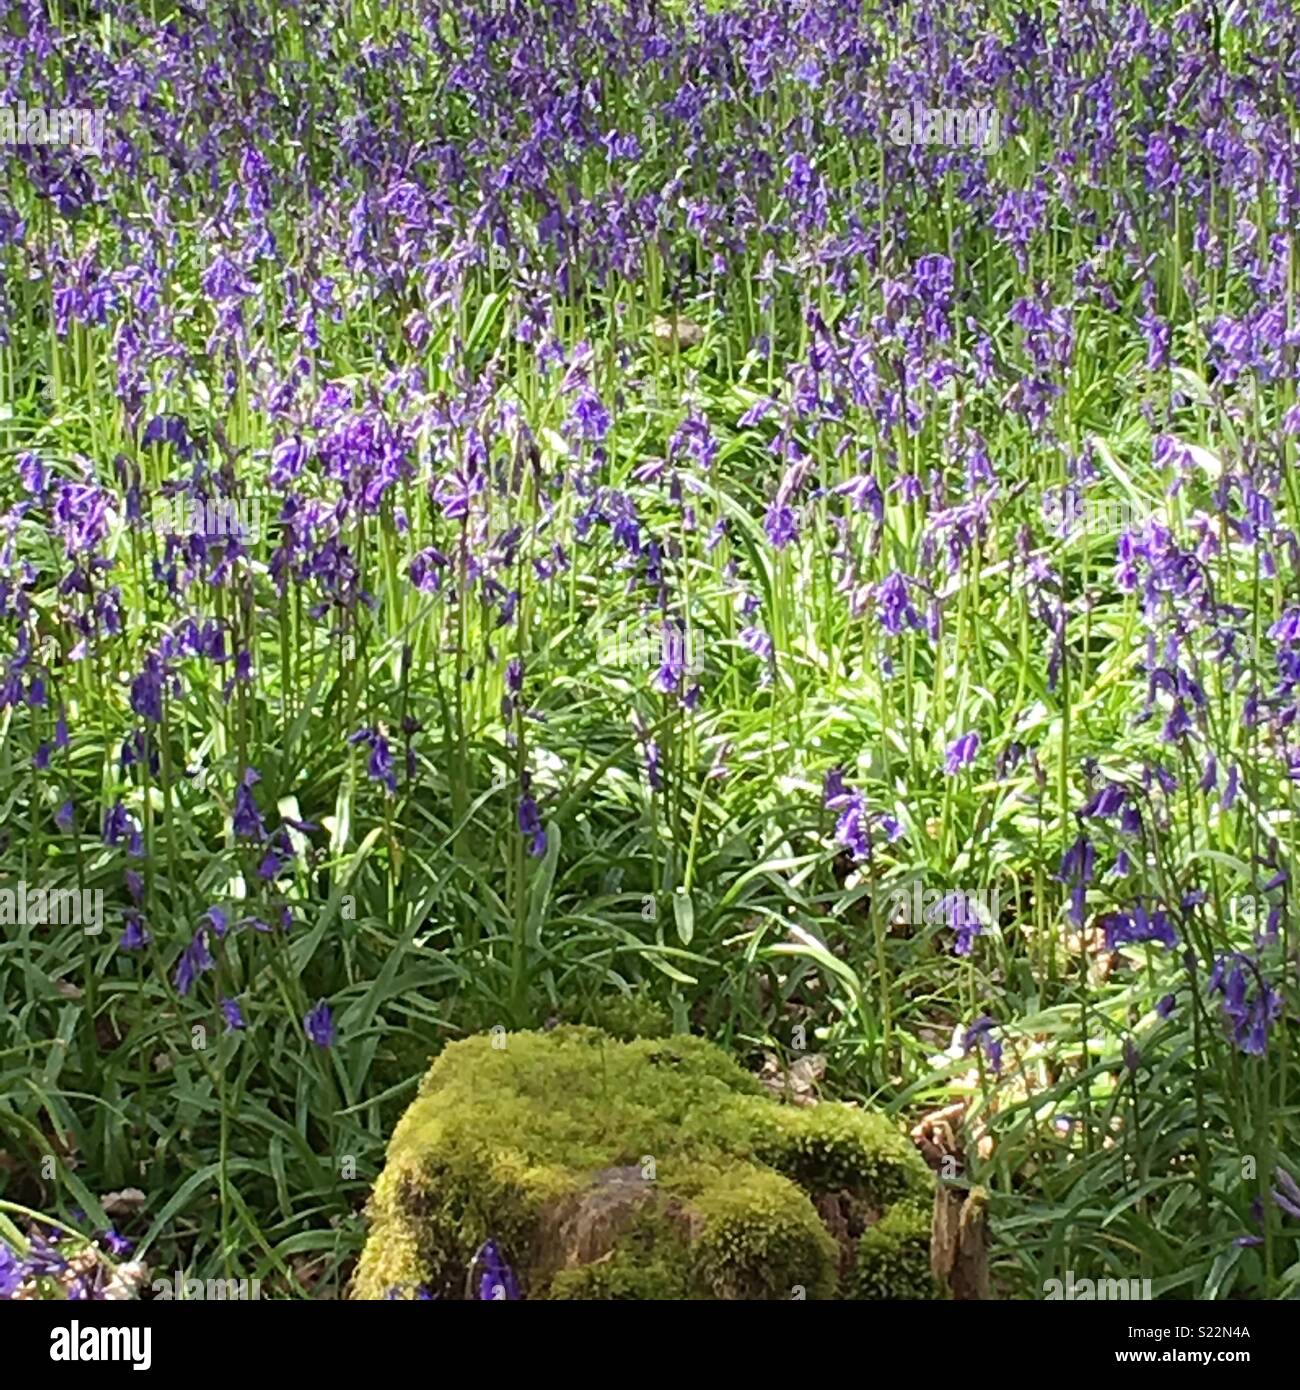 A mossy boulder in front of a carpet of bluebells Stock Photo